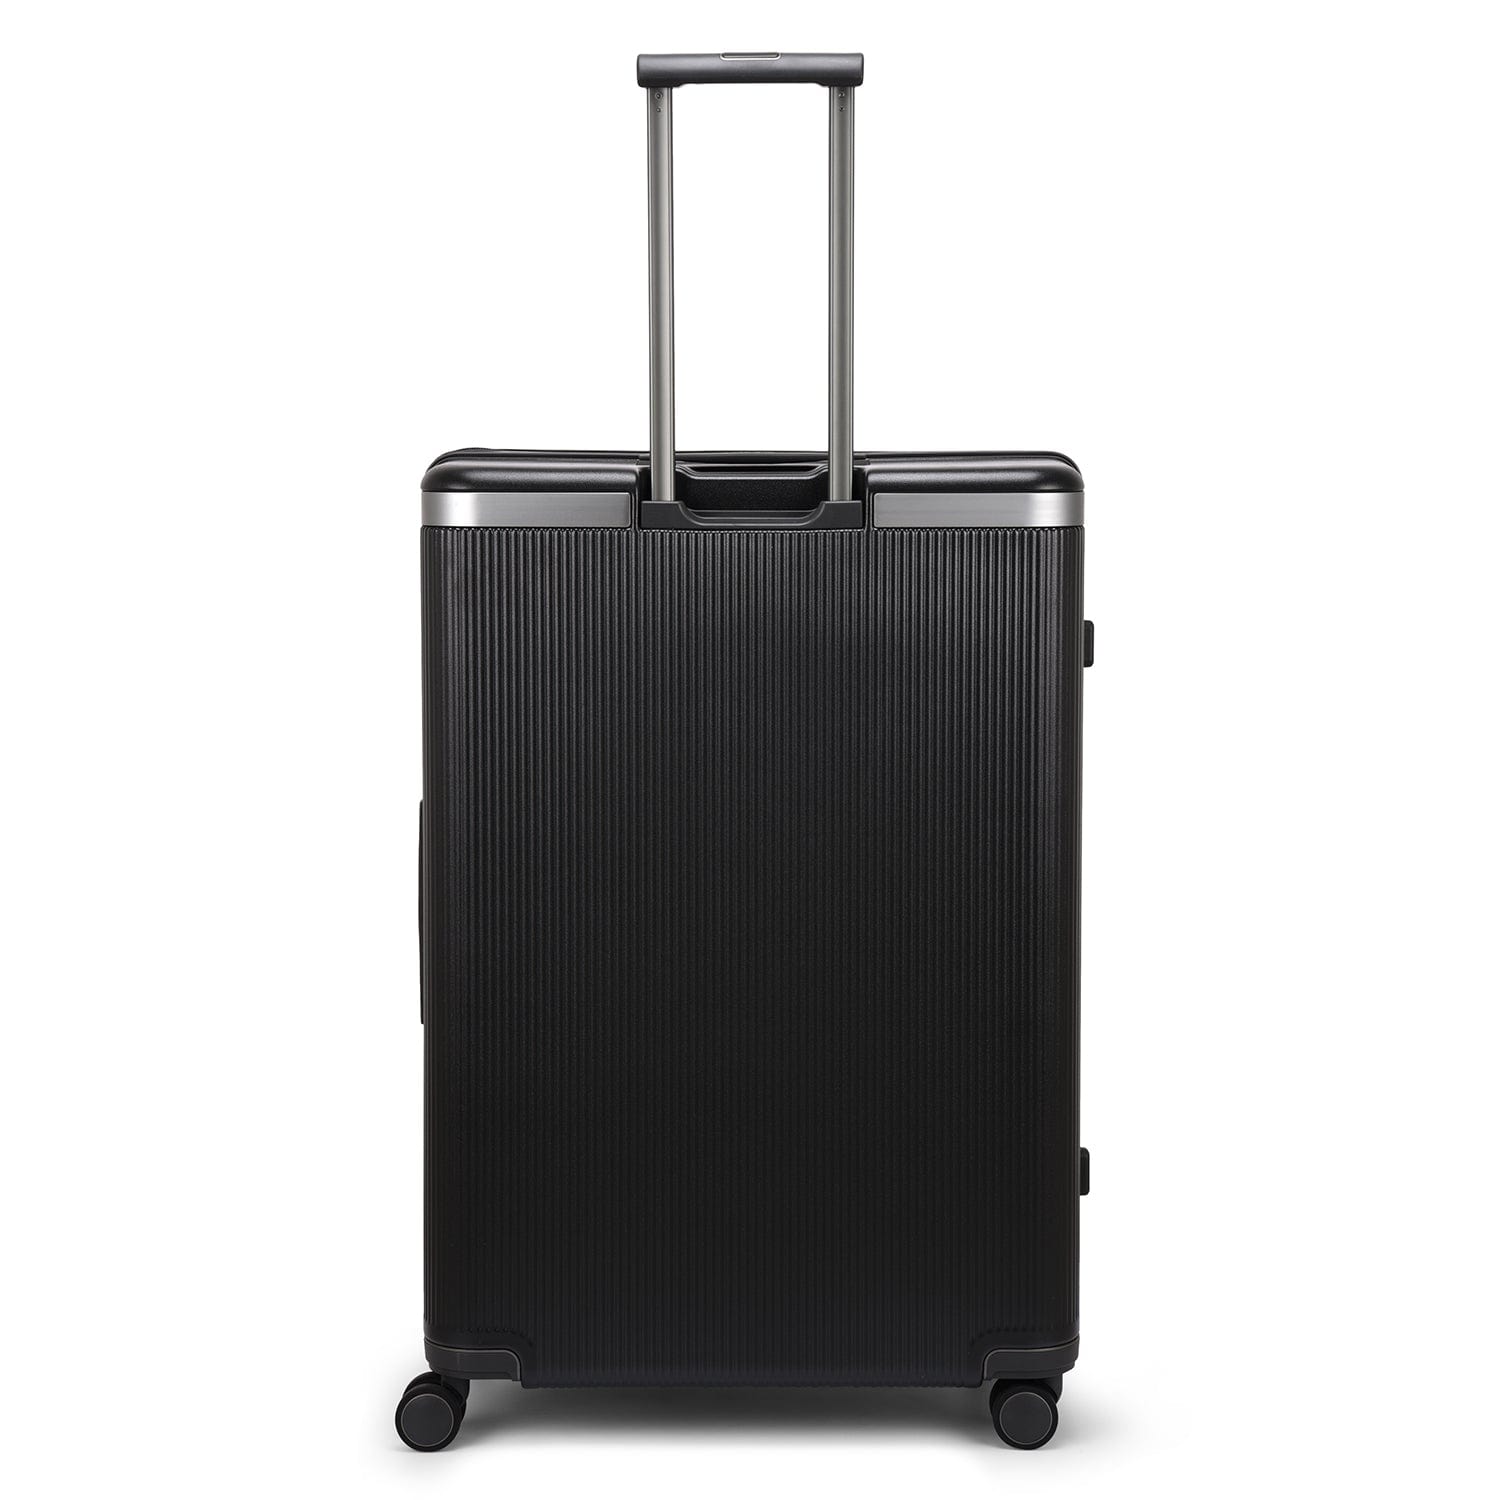 Echolac Dynasty 76.5cm Hardcase Non-Expandable 4 Double Wheel Check-In Luggage Trolley Vulcan Grey - PC142 28 VULCAN GREY